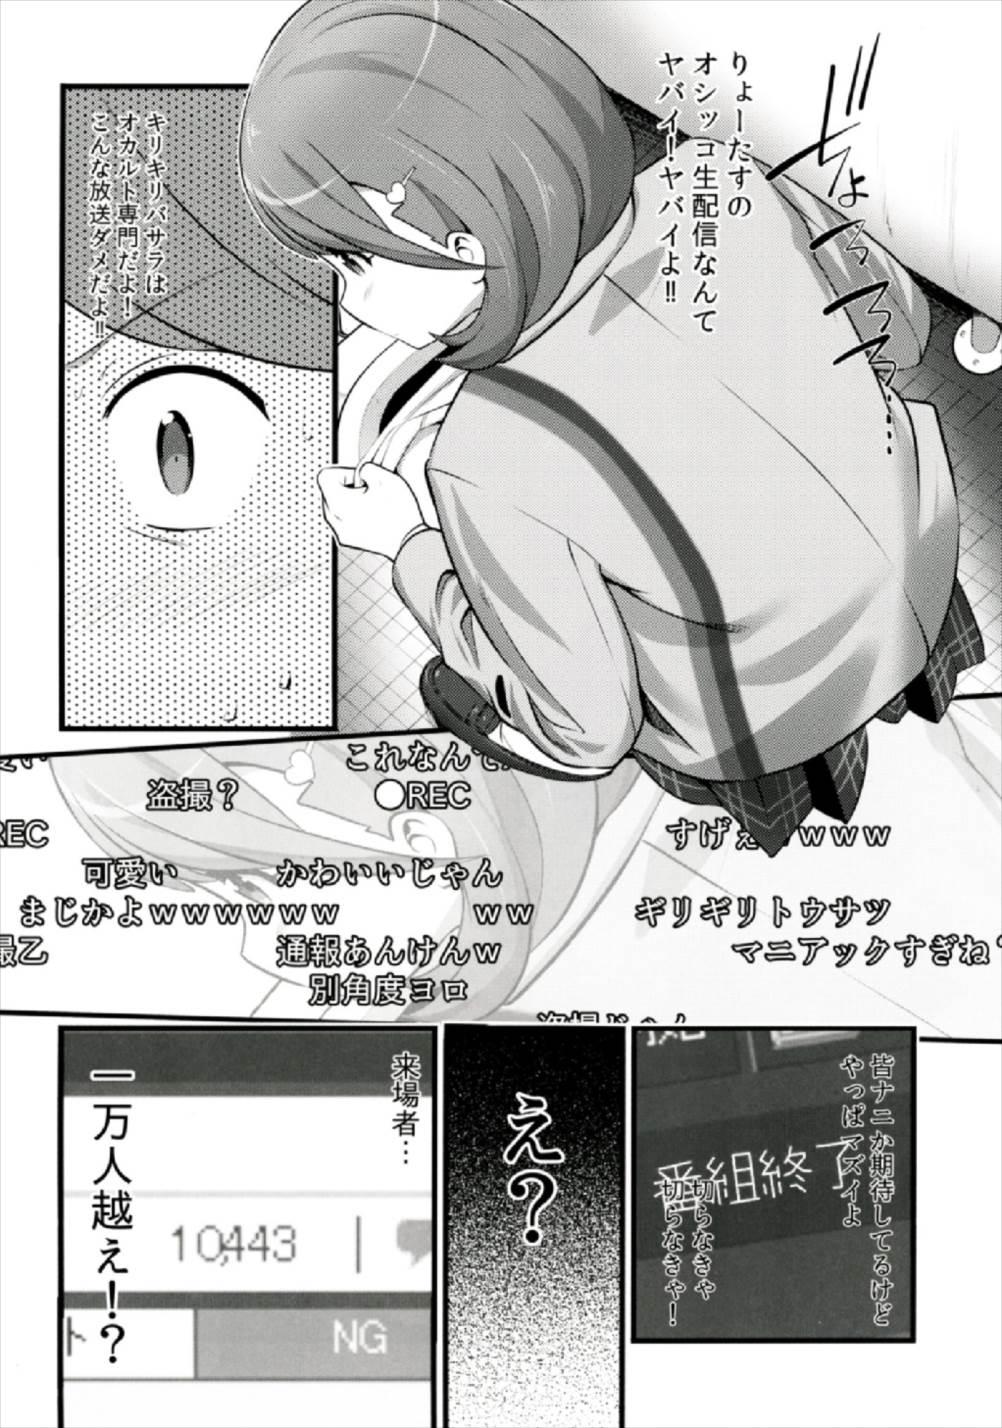 Anal Play Camera Secchi;Nine - Occultic nine Couple Fucking - Page 8